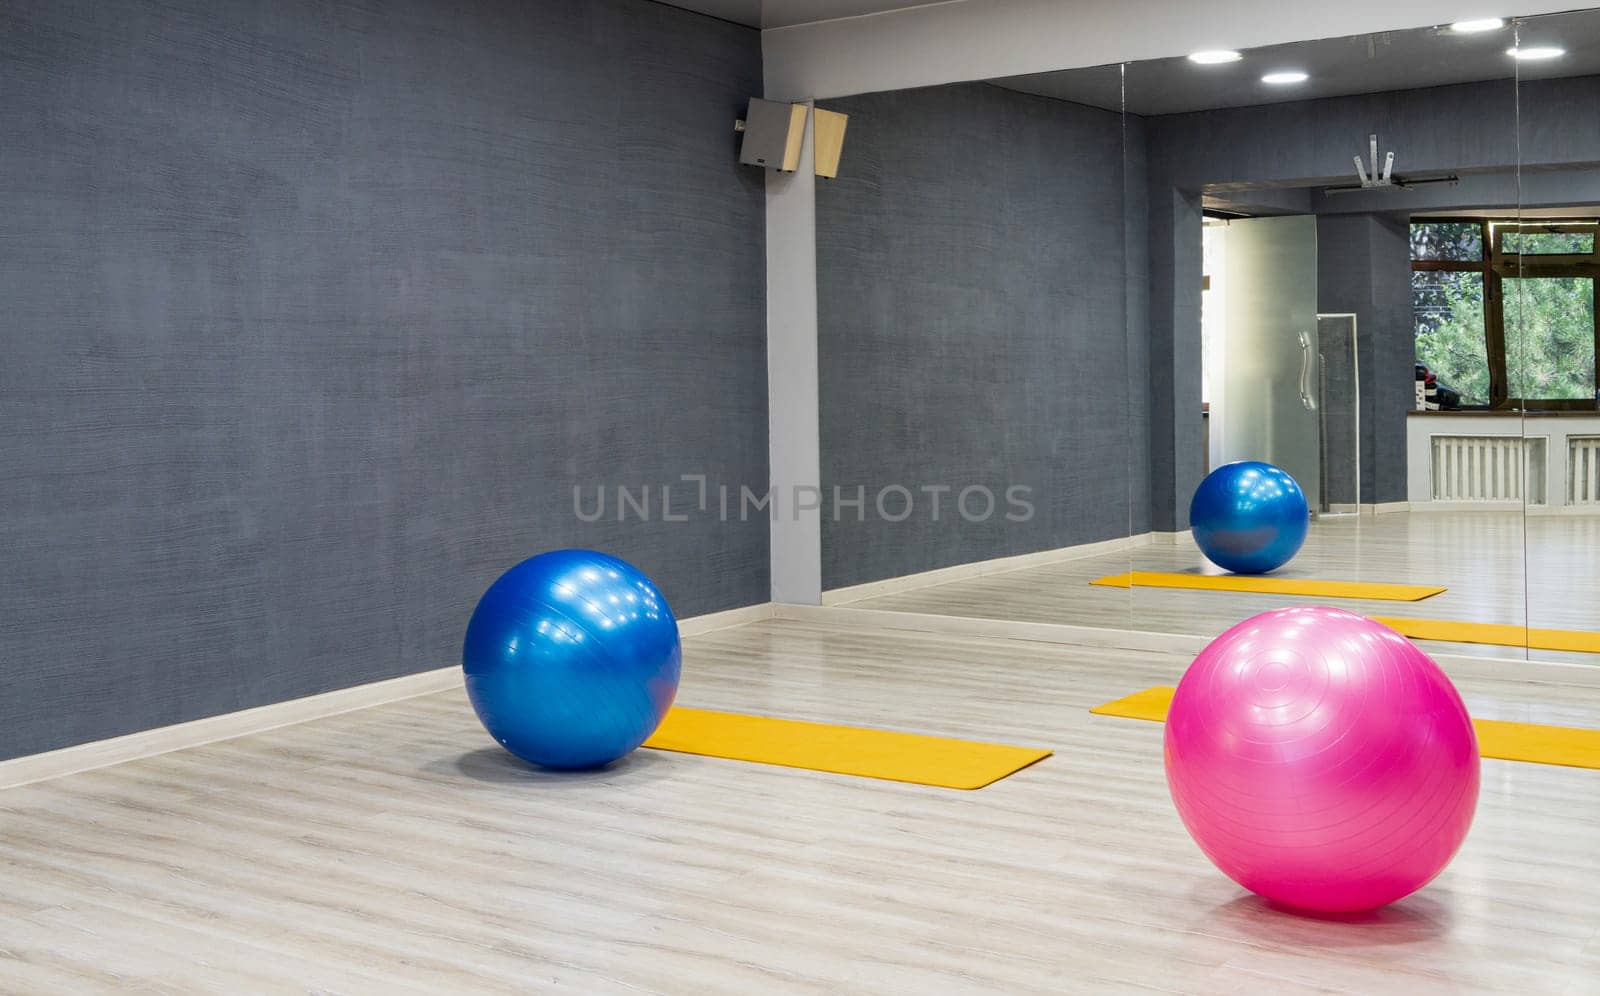 The exercise balls in the sports complex